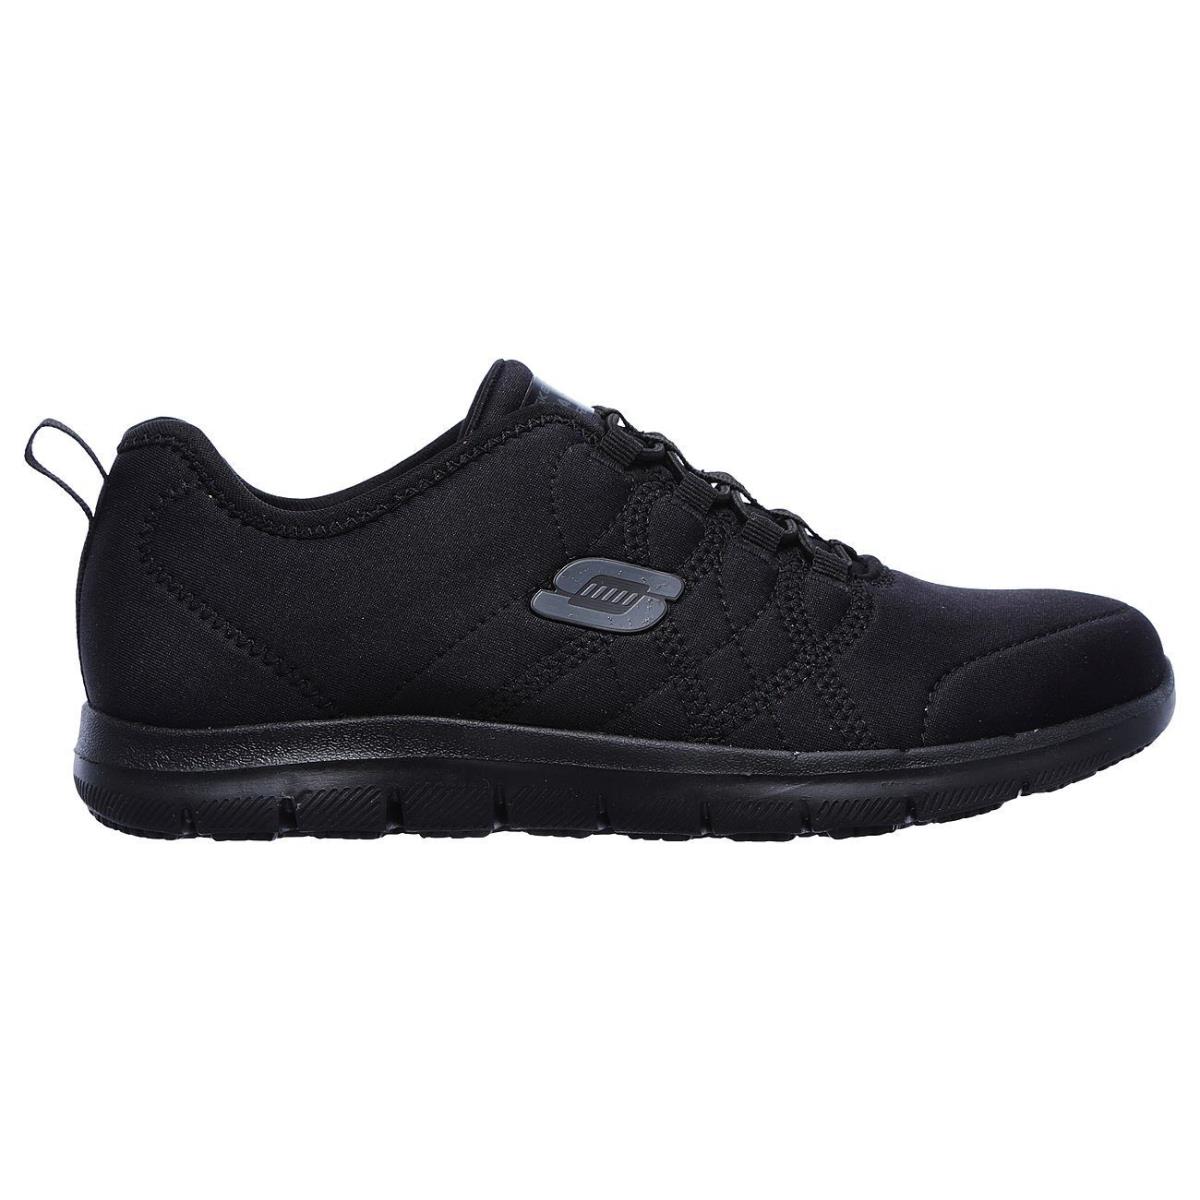 skechers casual black shoes